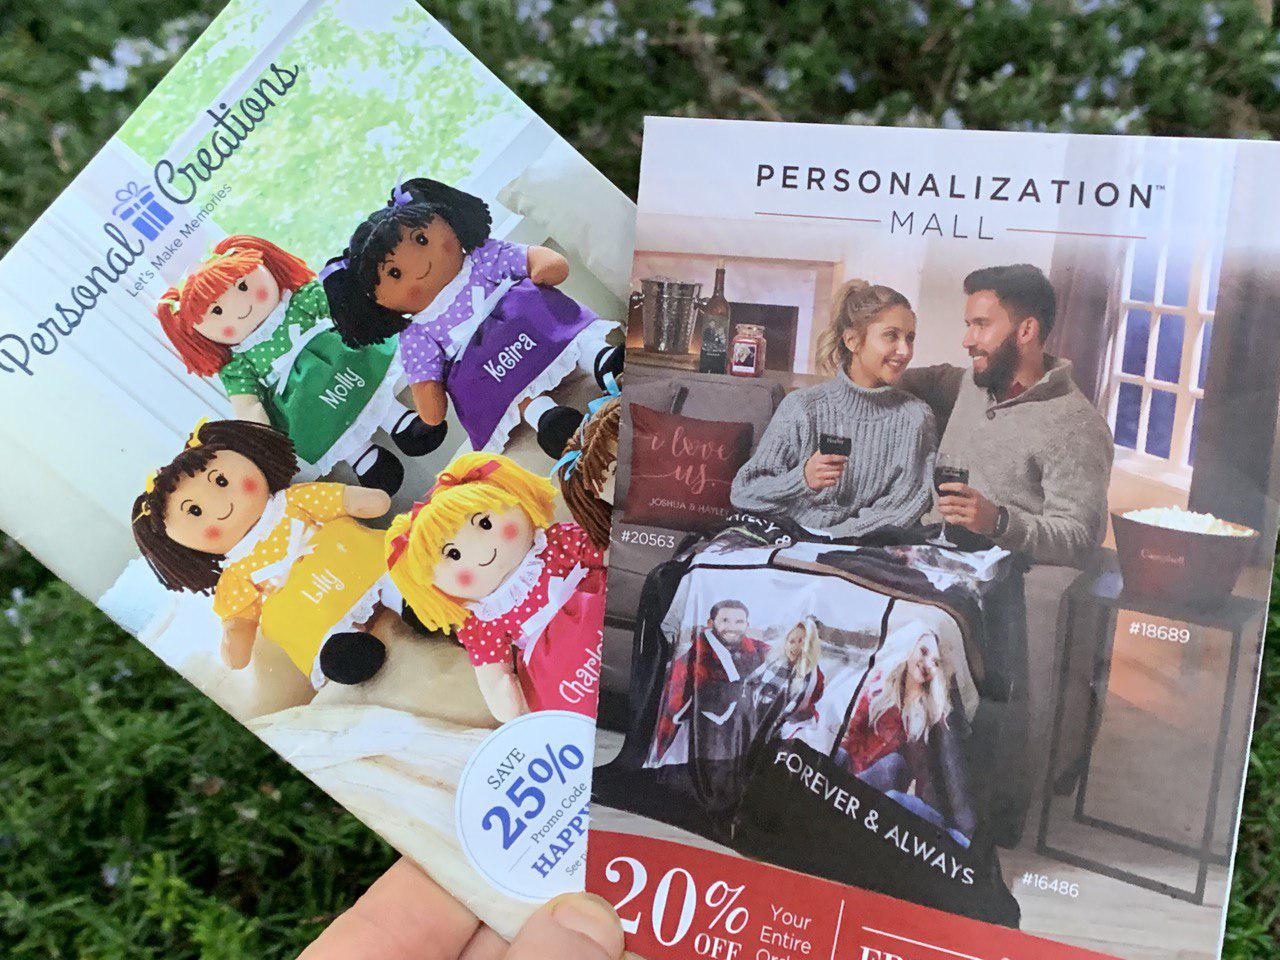 Personalization Mall and Personal Creations Deals